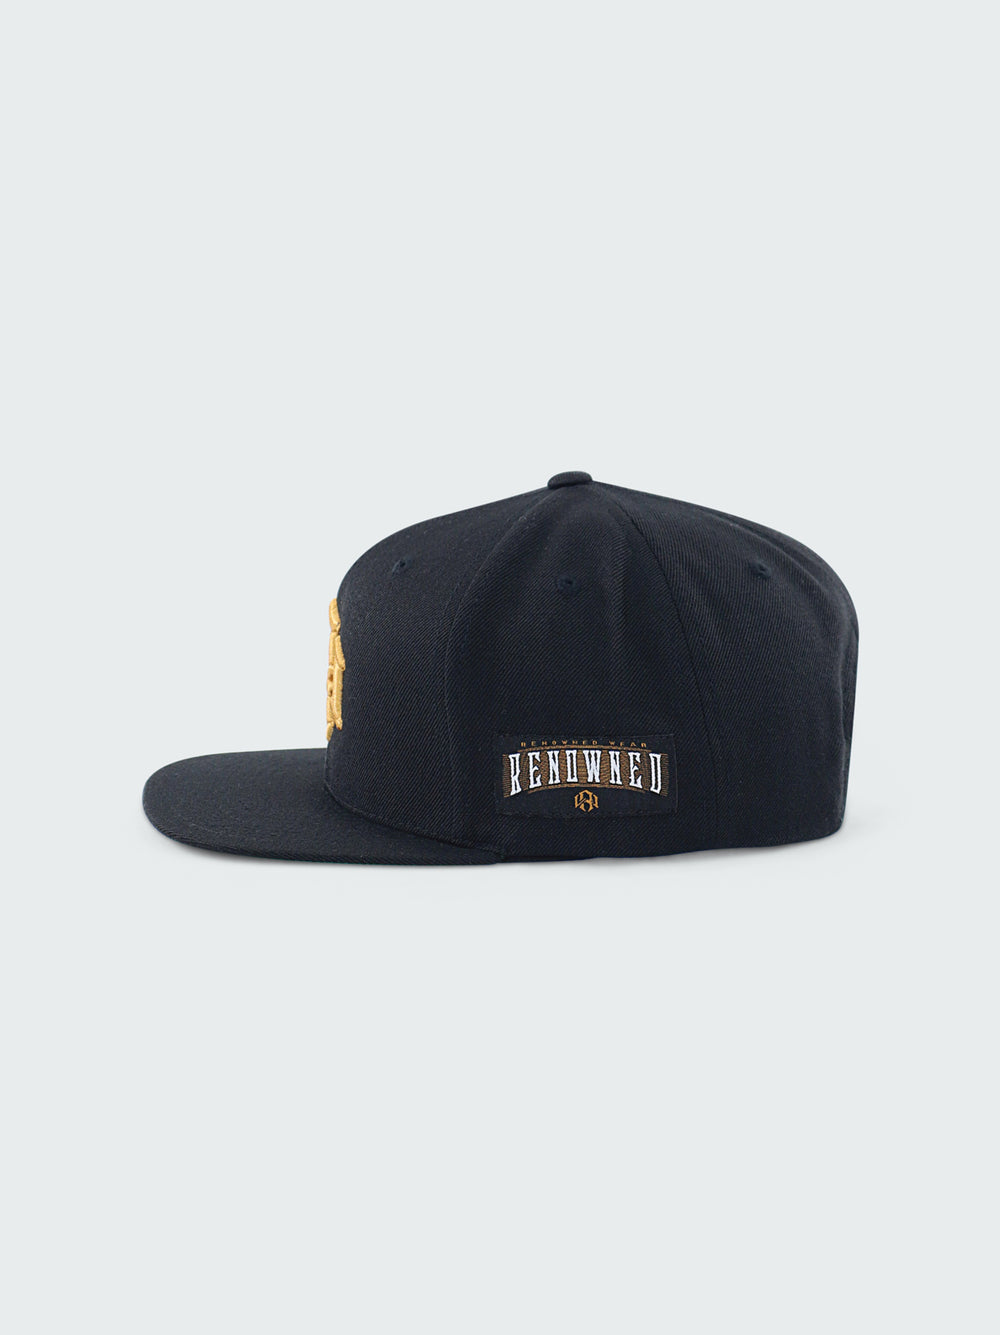 Black Snapback Cap by RENOWNED WEAR featuring a Gold 3D Embroidered front logo left side woven patch